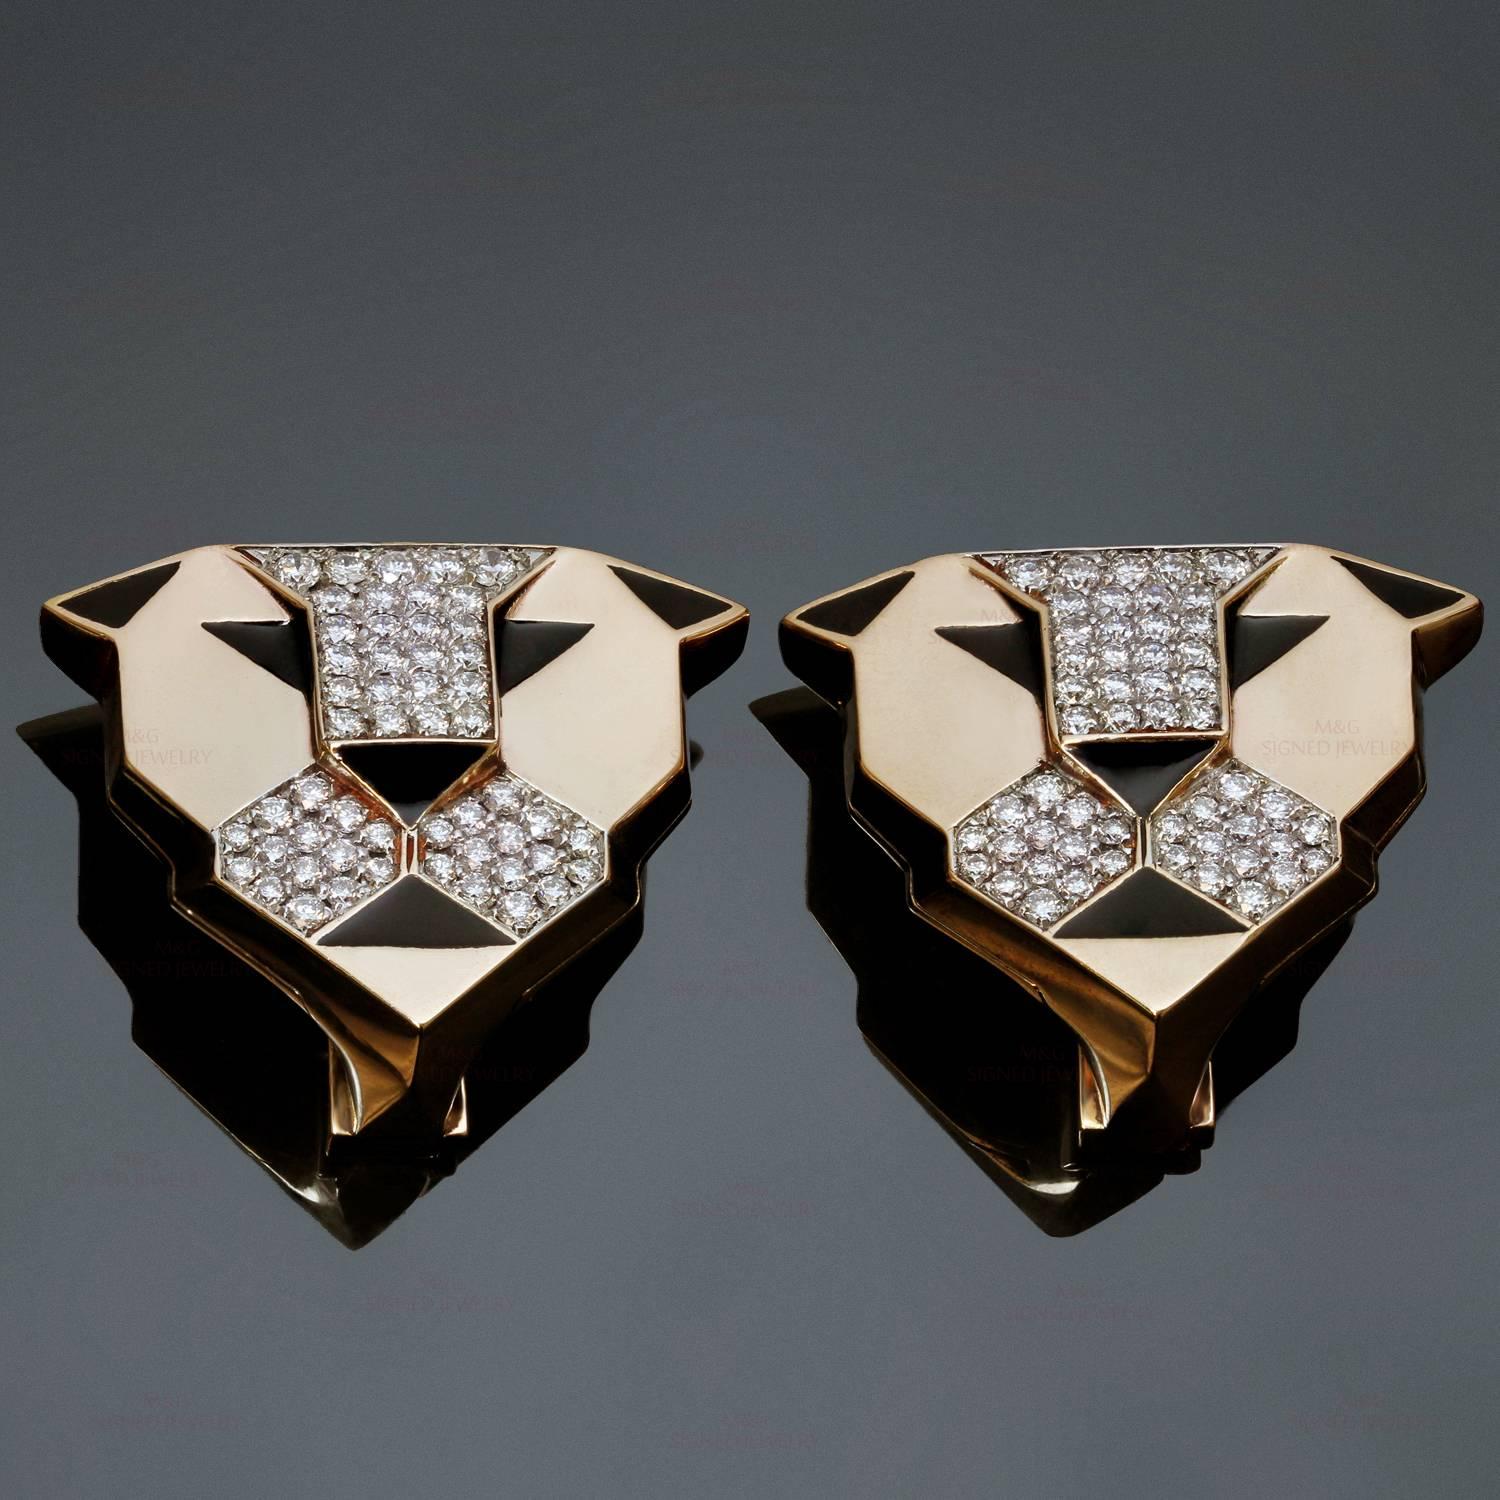 These fabulous Bulgari earrings from the Enigma collection features a regal lion head design crafted in 18k rose gold and accented with black enamel and pave-set with brilliant-cut round diamonds of an estimated 2.15 carats. Completed with